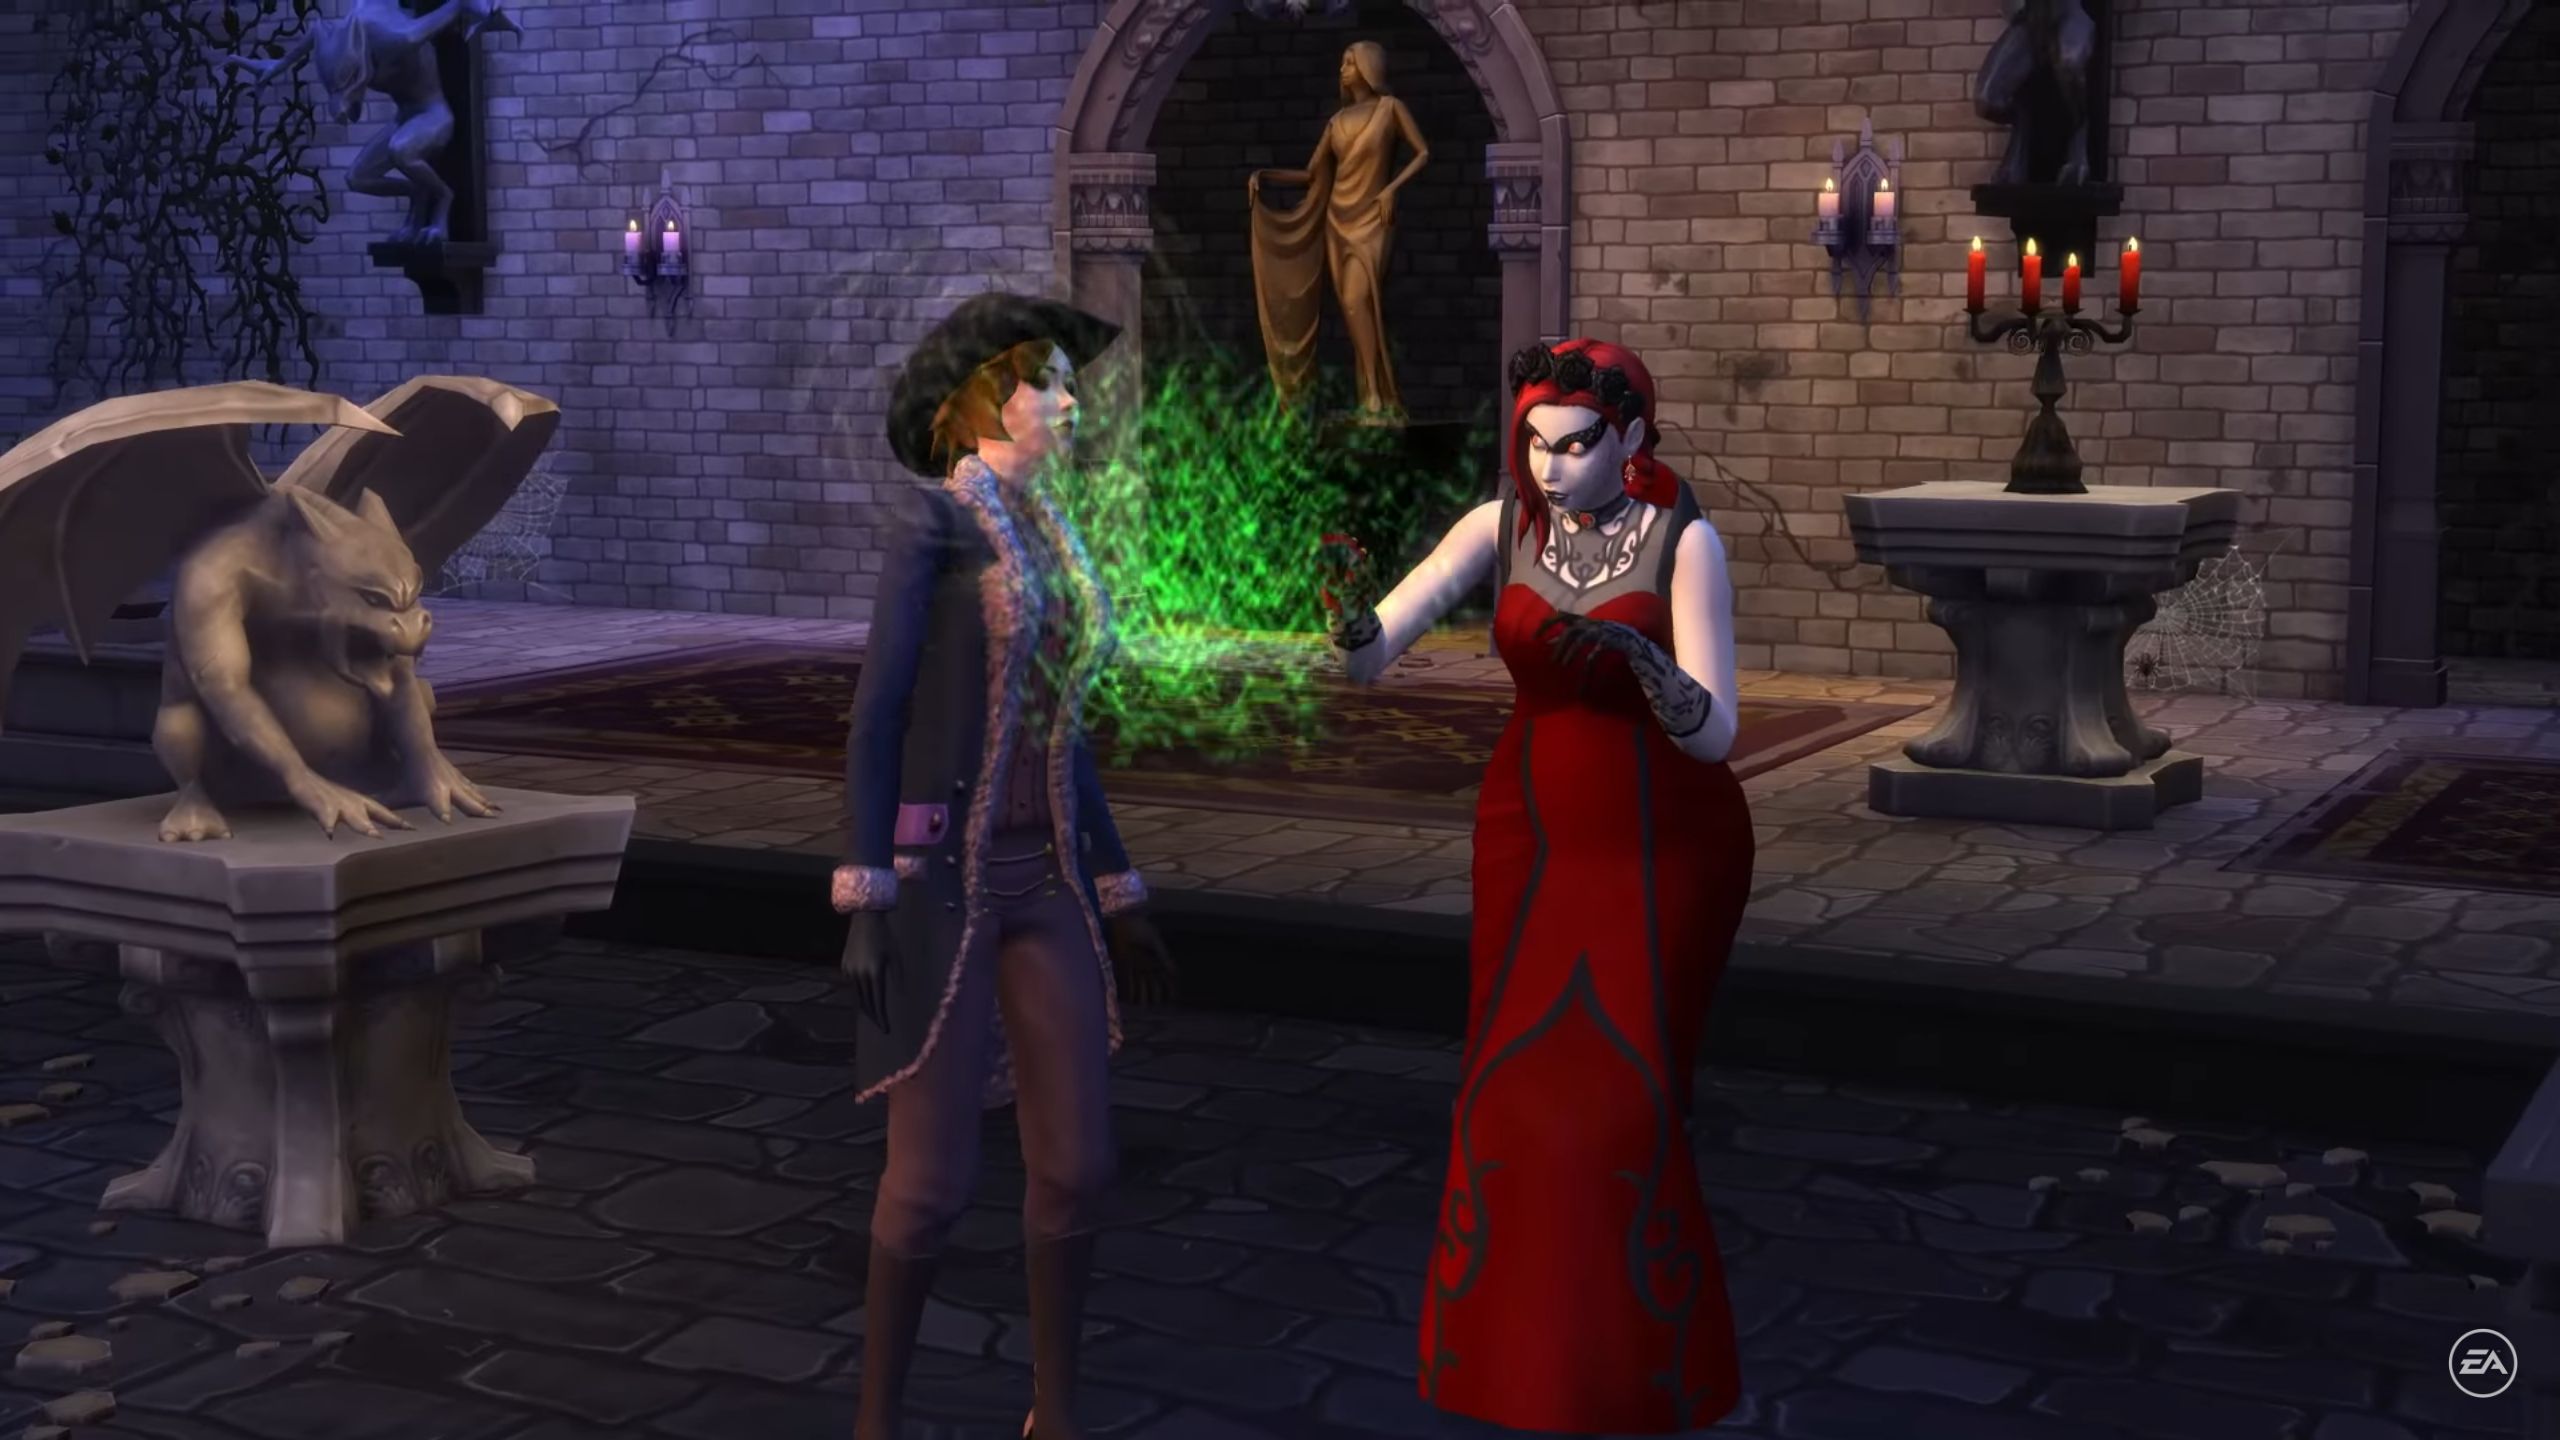 The Sims 4 Vampires Game Pack Guide